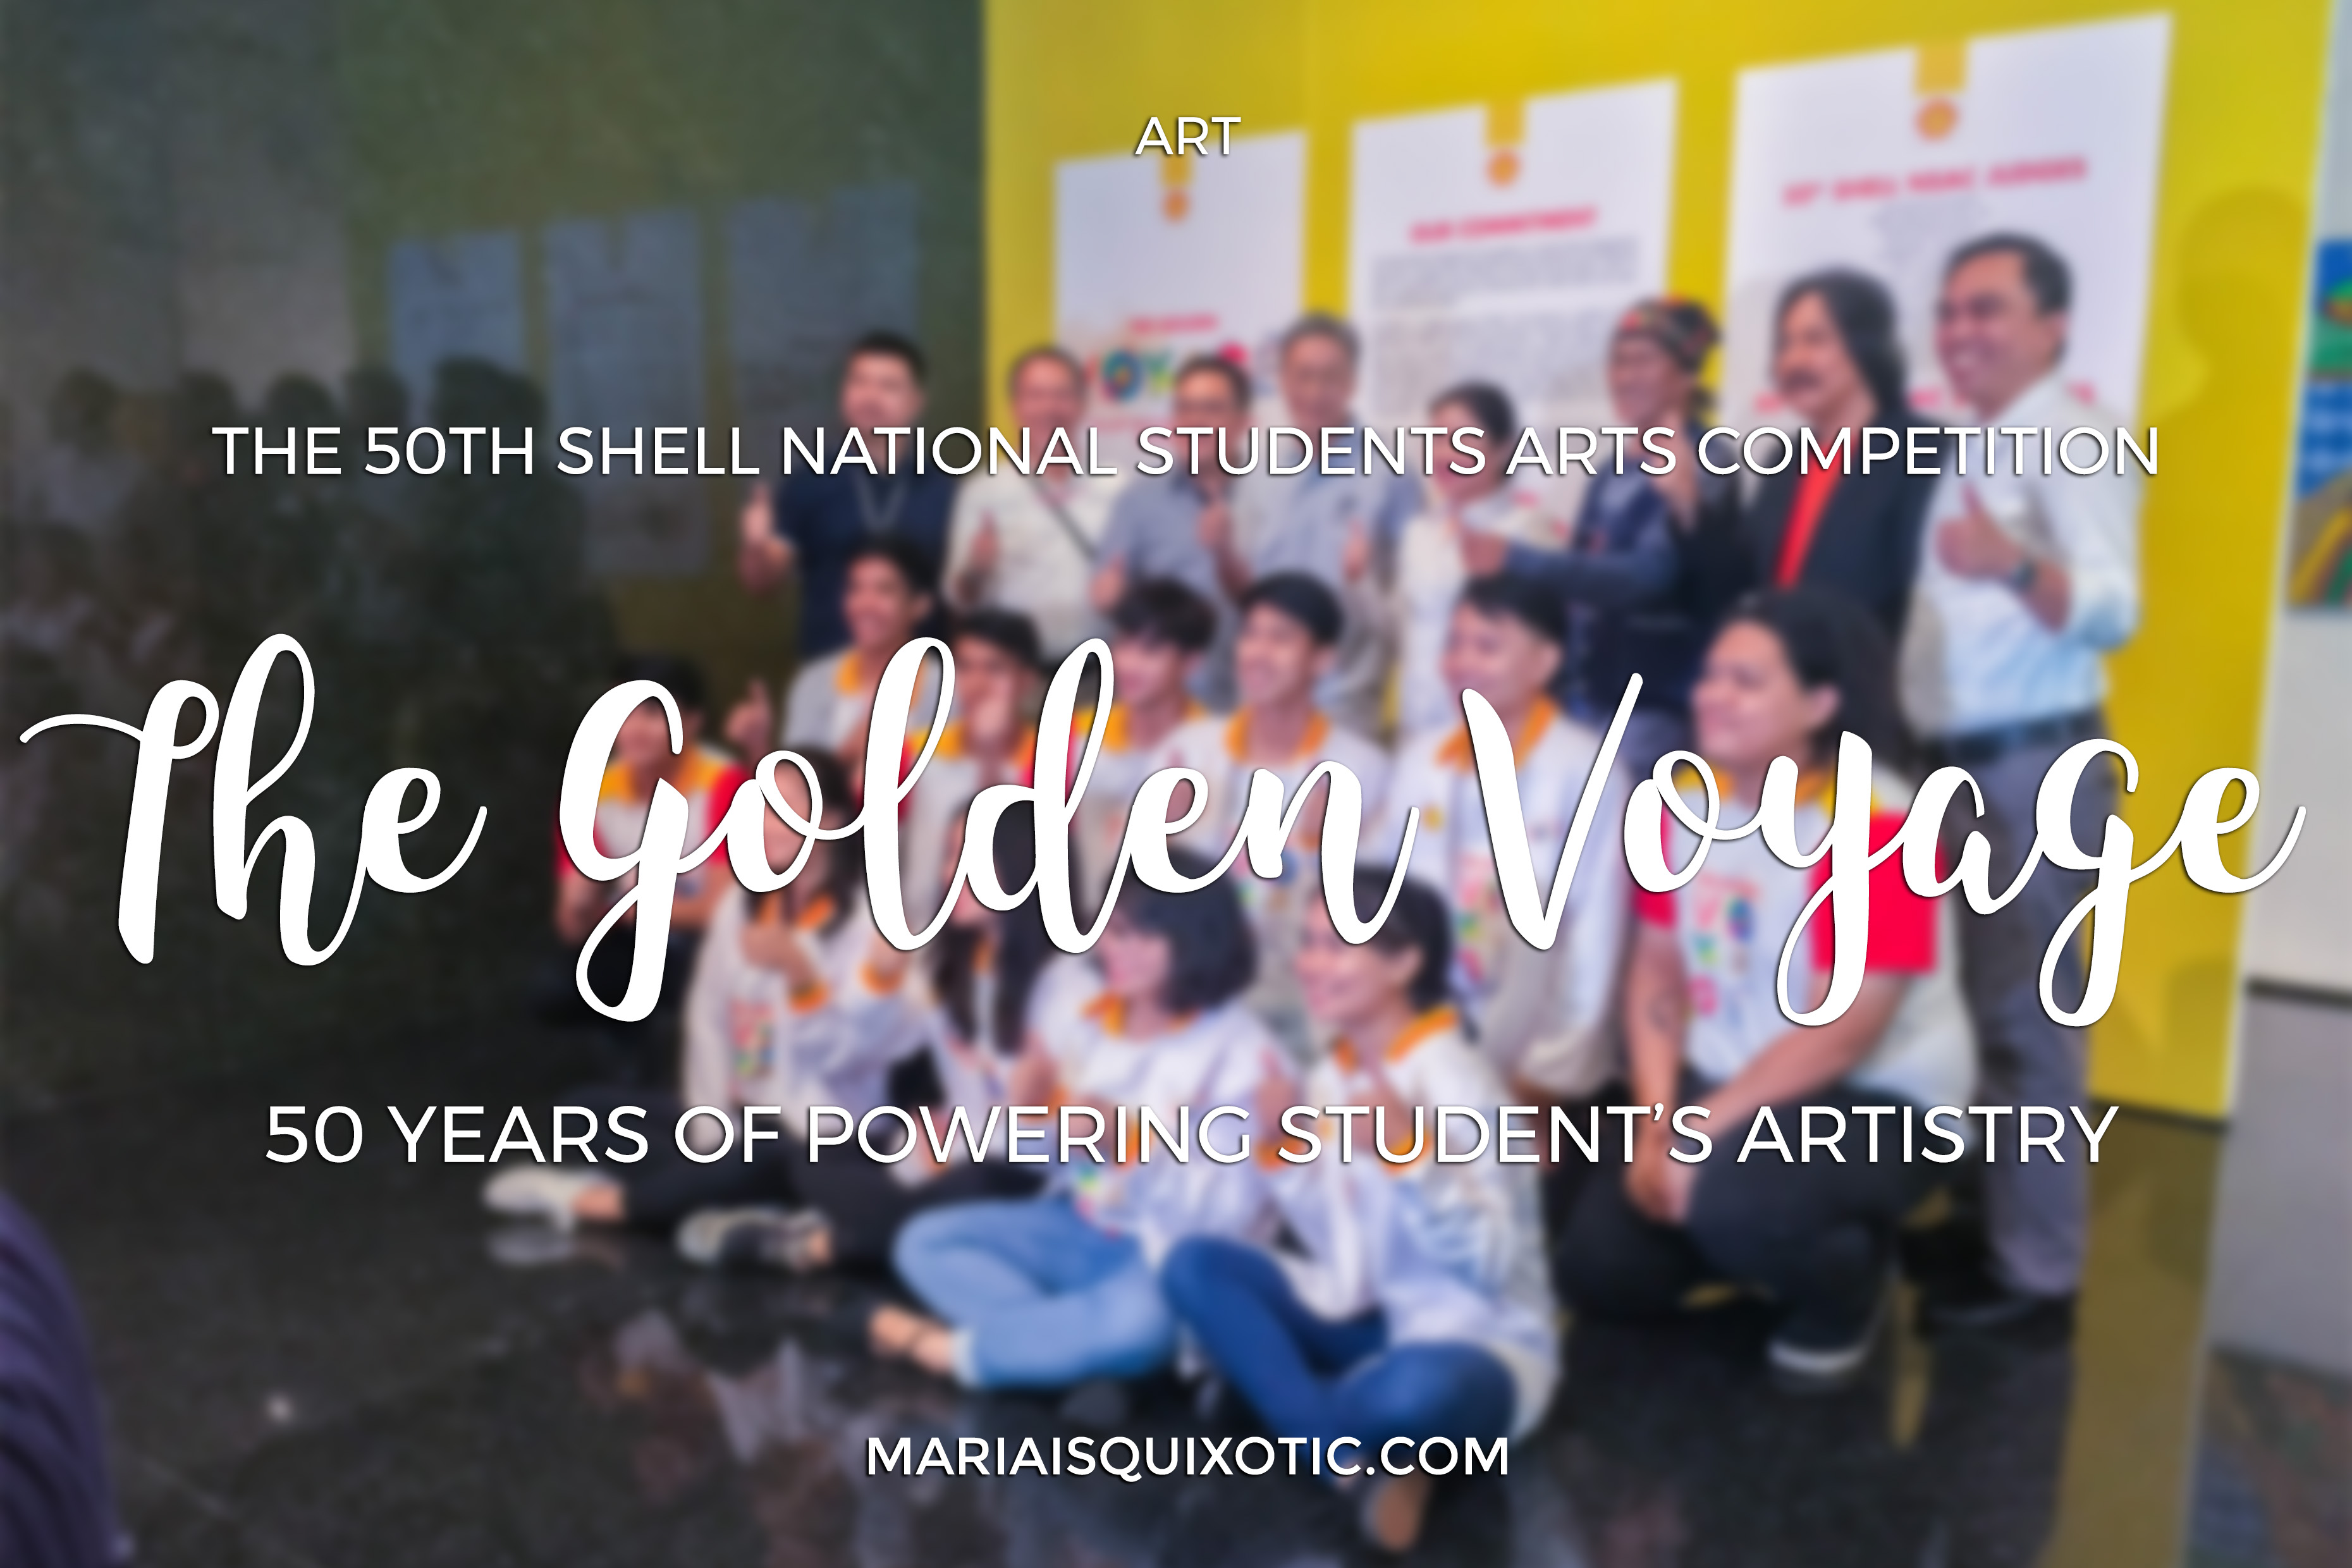 The 50th Shell National Students Arts Competition